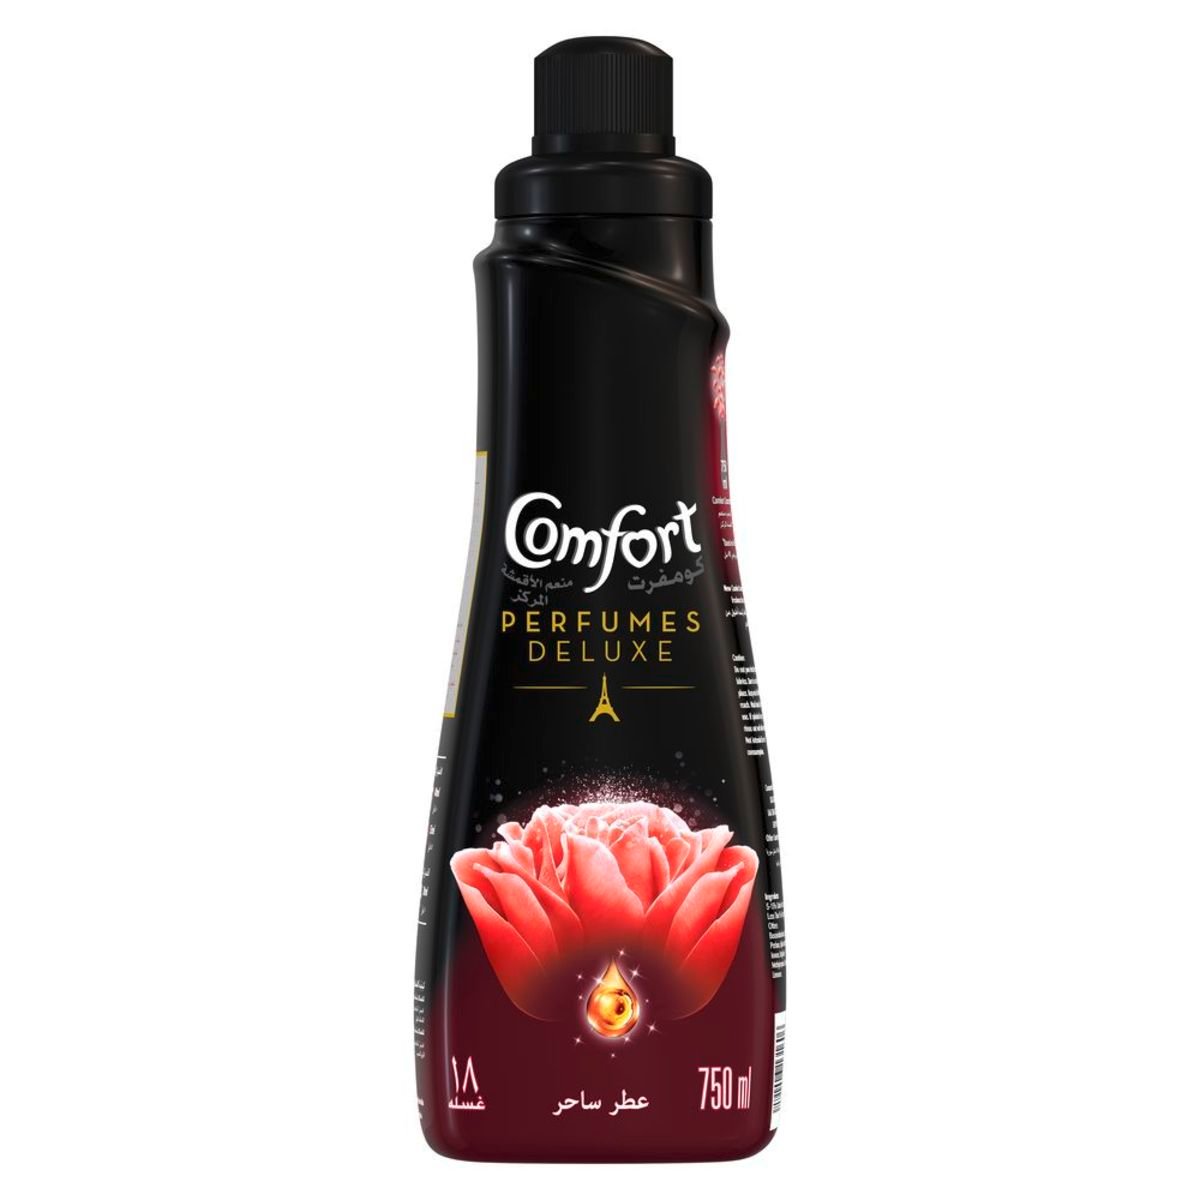 Comfort Perfumes Deluxe Concentrated Fabric Softener Glamour 750ml